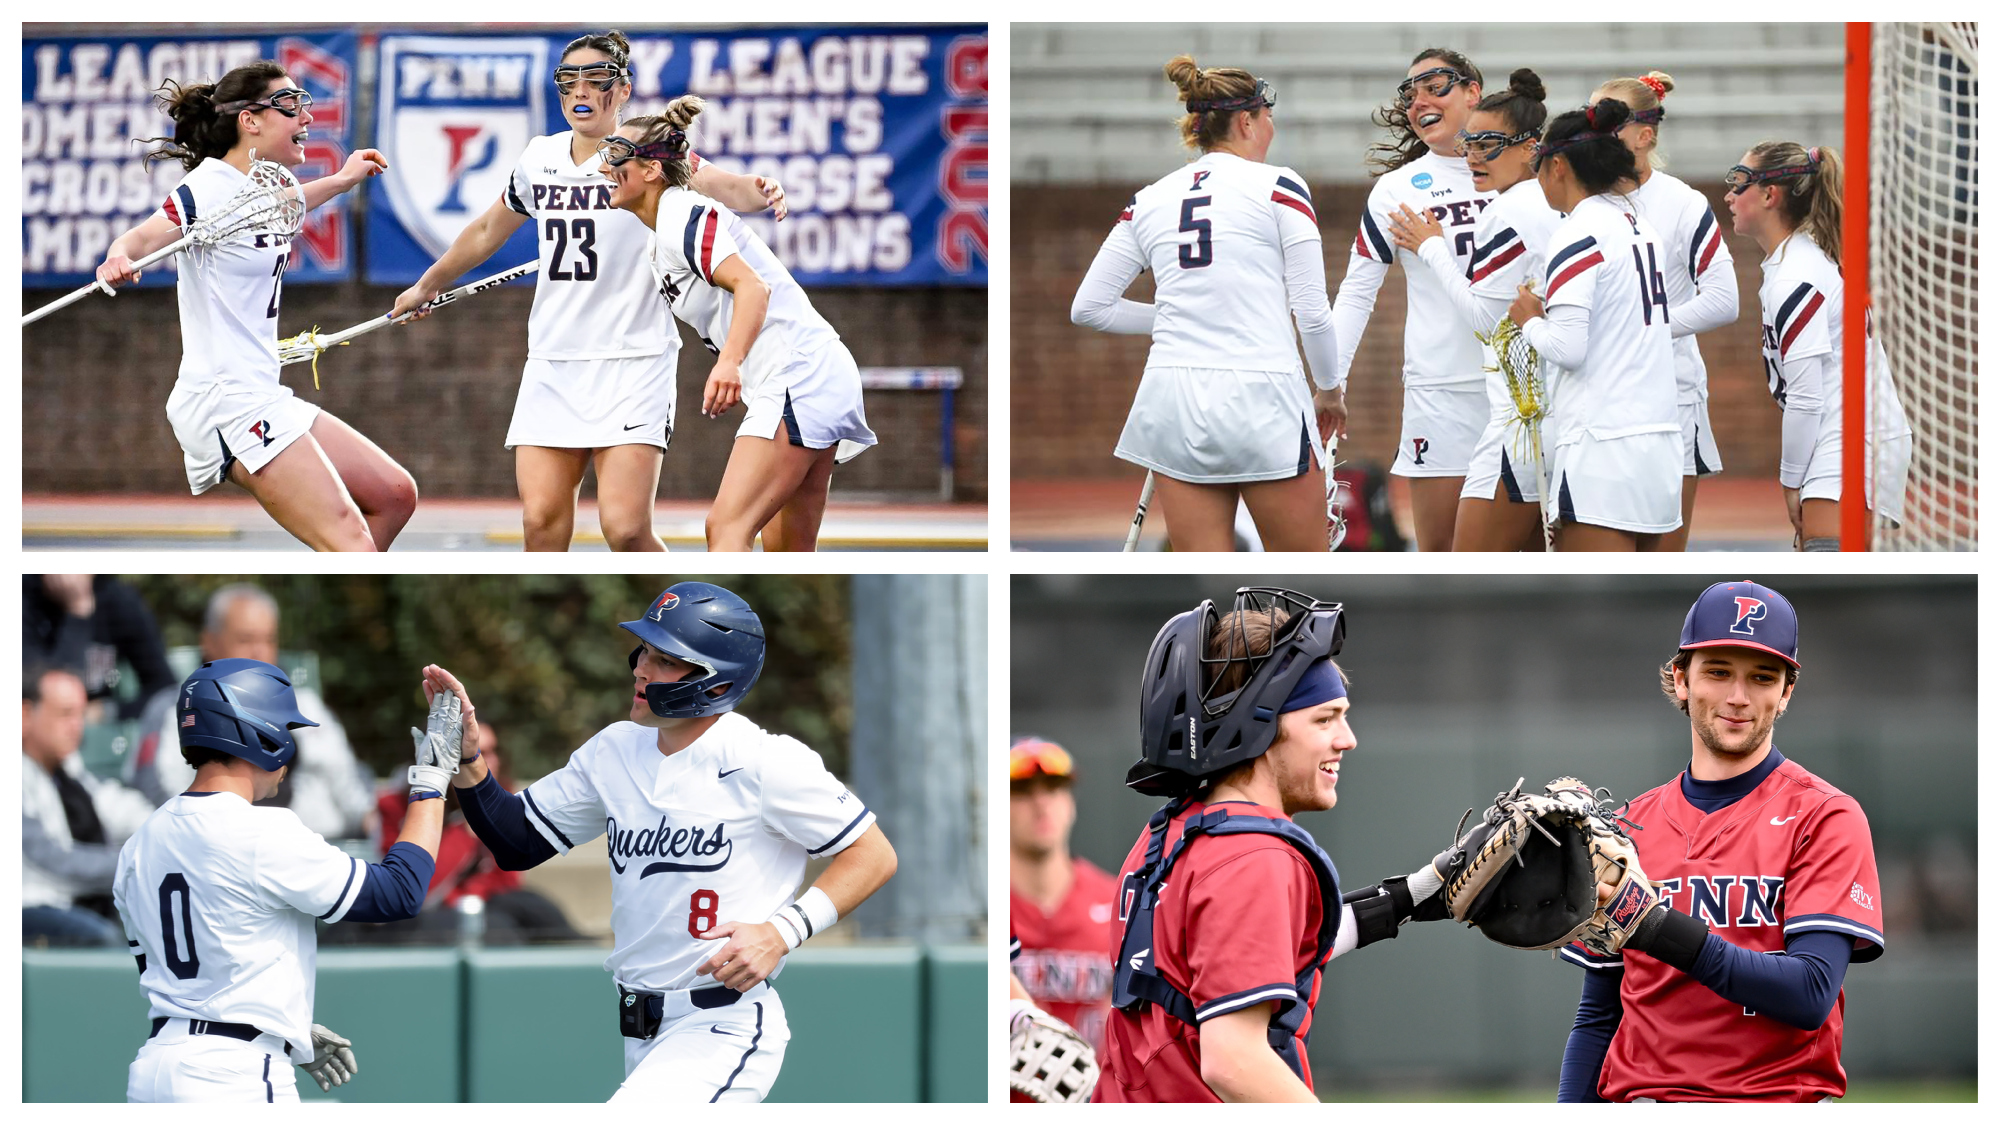 A collage showing lacrosse players celegrating and baseball players high-fiving.